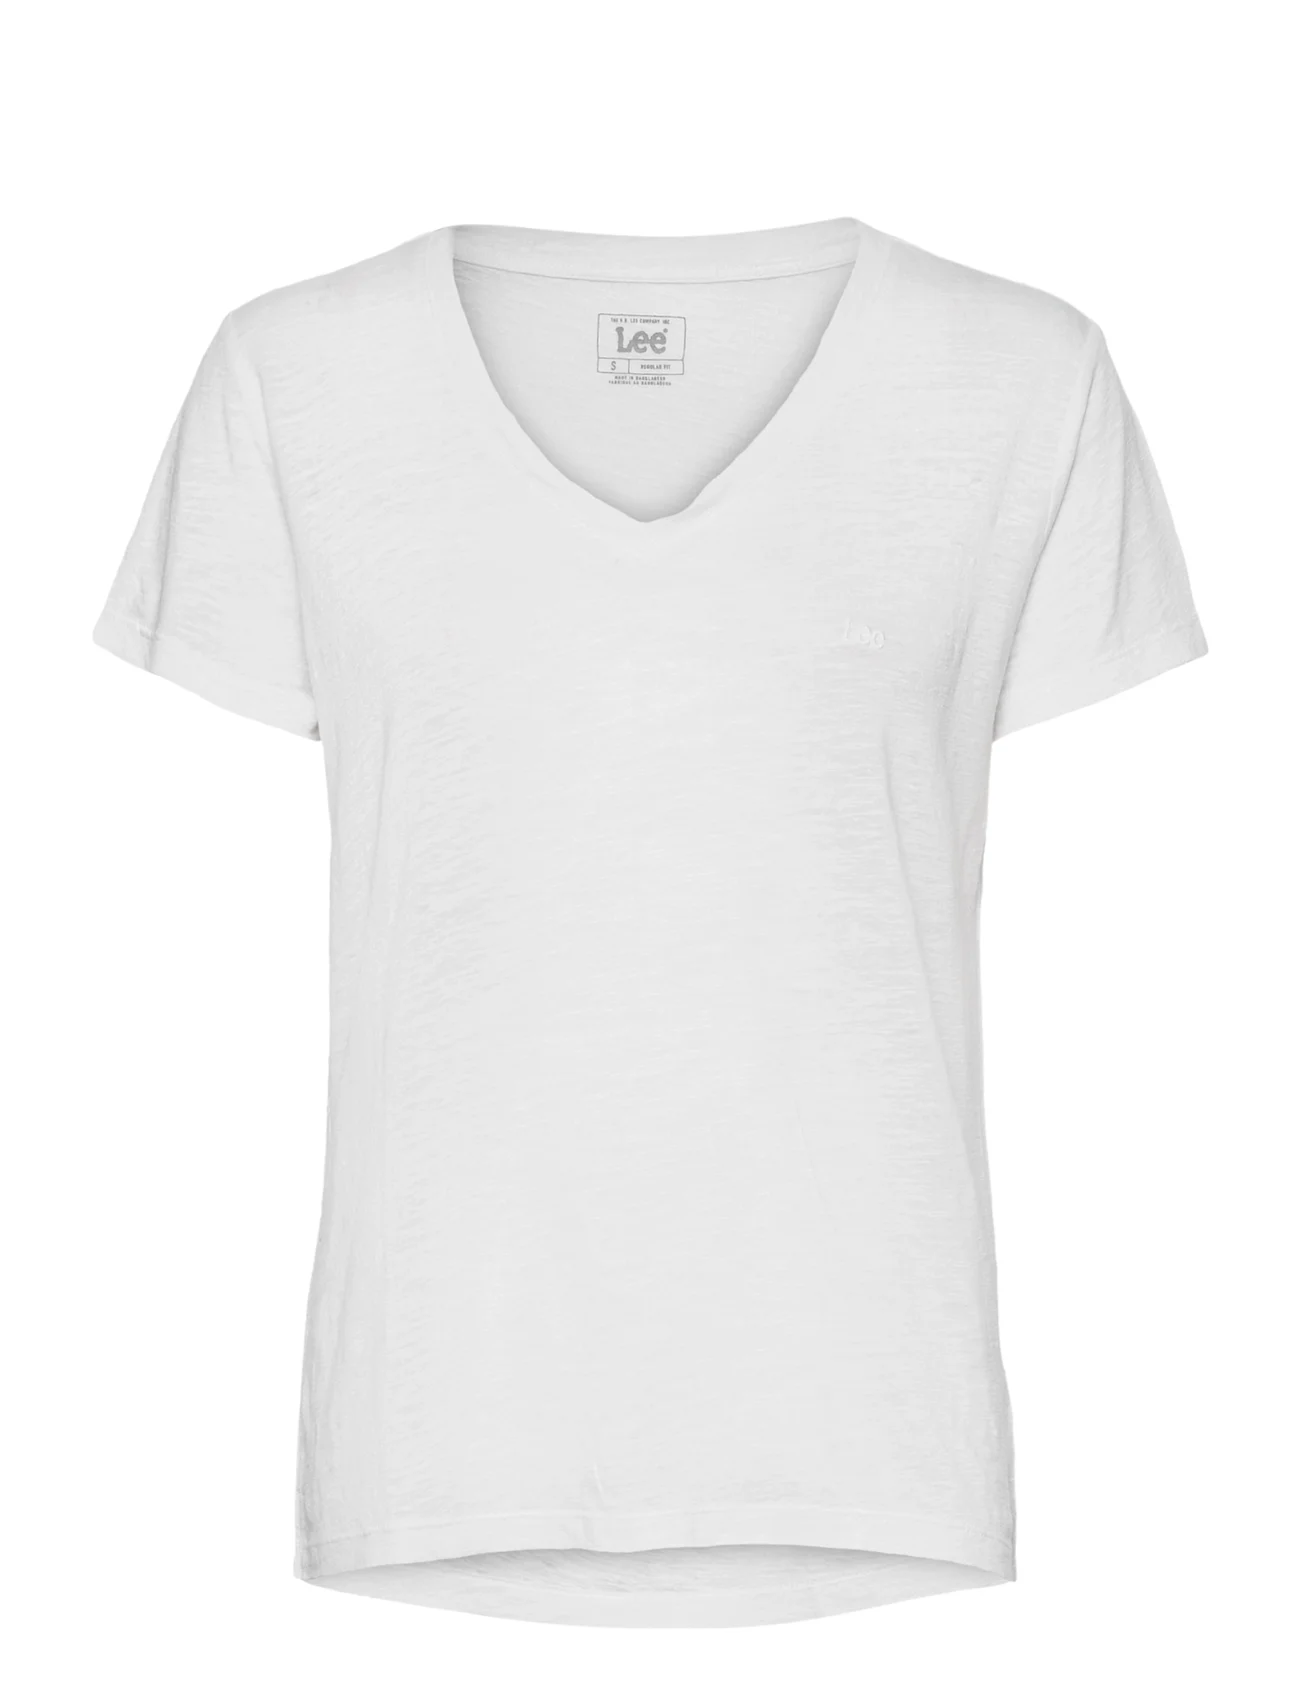 Lee Jeans - V NECK TEE - t-shirt & tops - bright white - 0